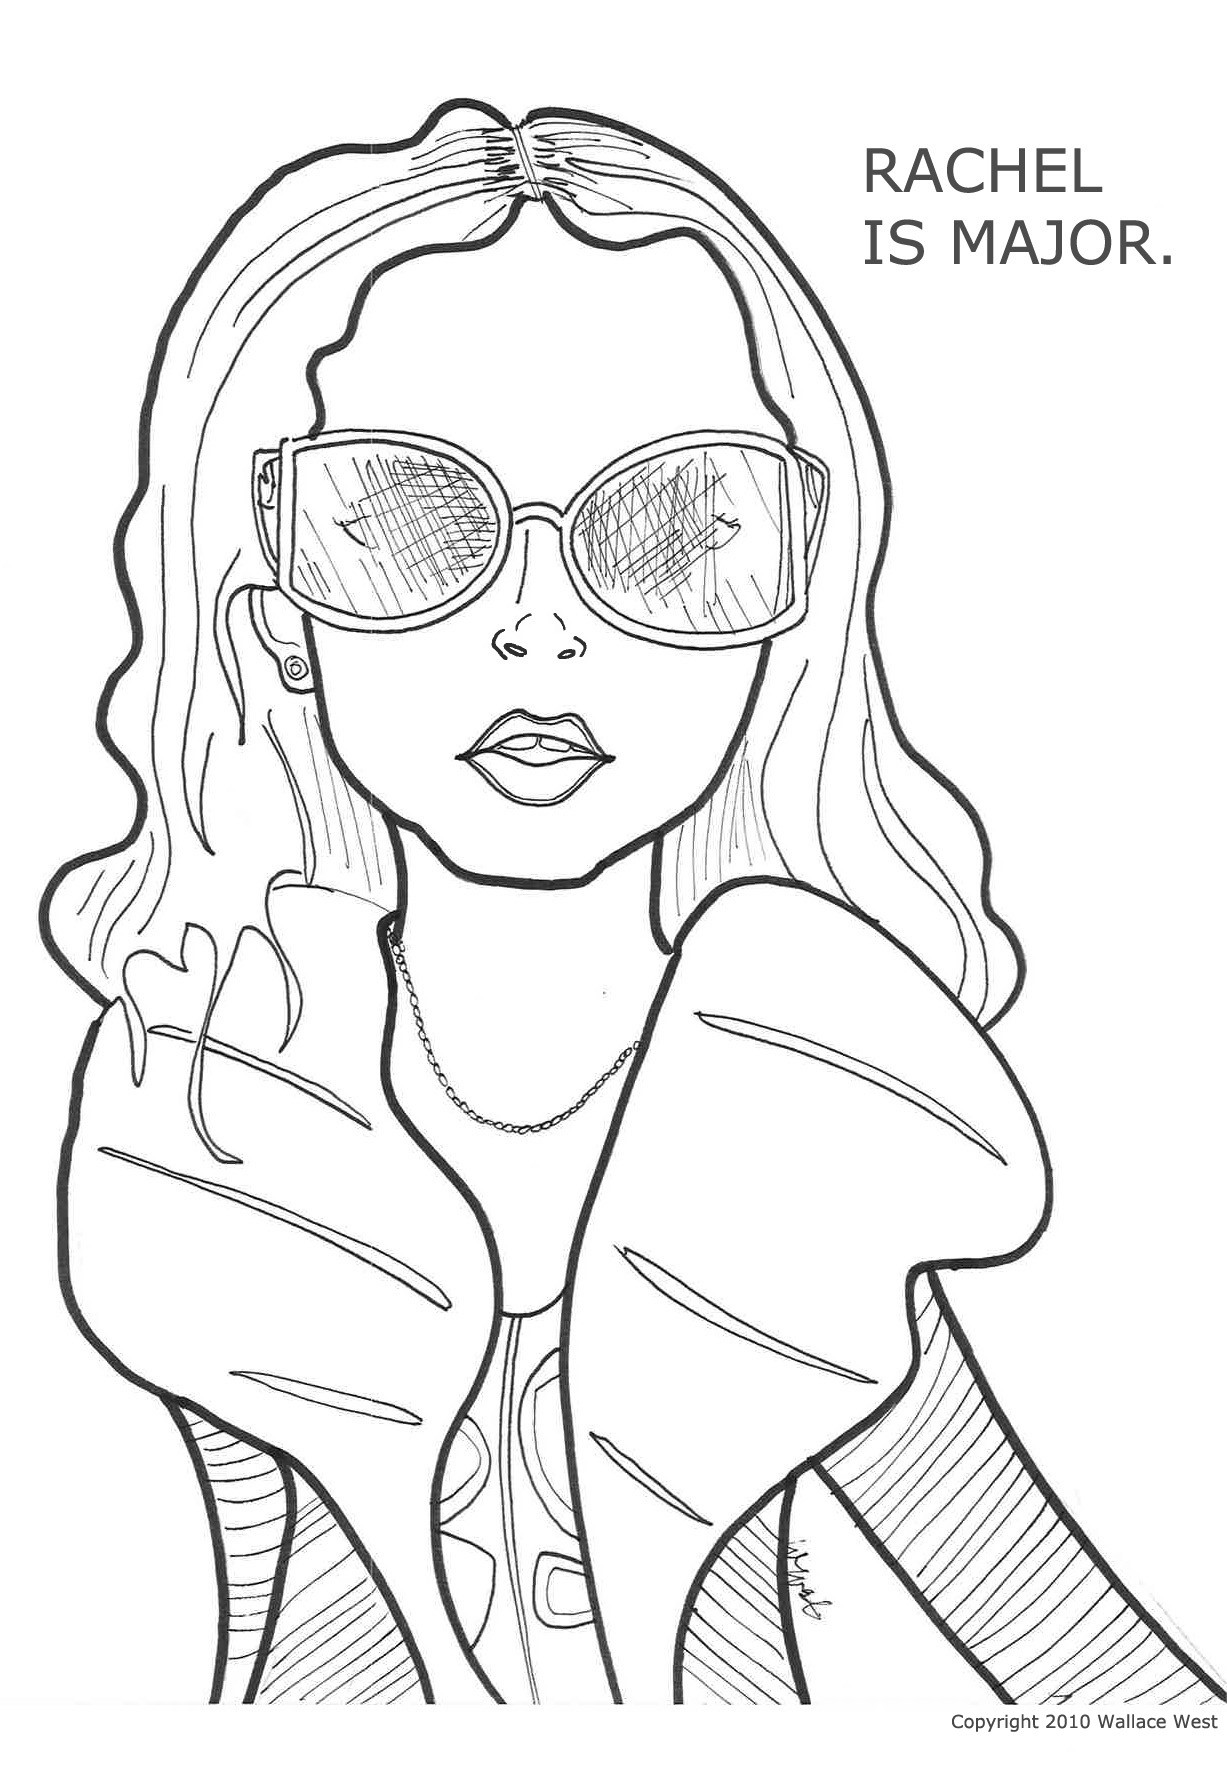 Fashion Girl Coloring Book
 FASHION IS FREE FASHION WEEK COLORING PAGES